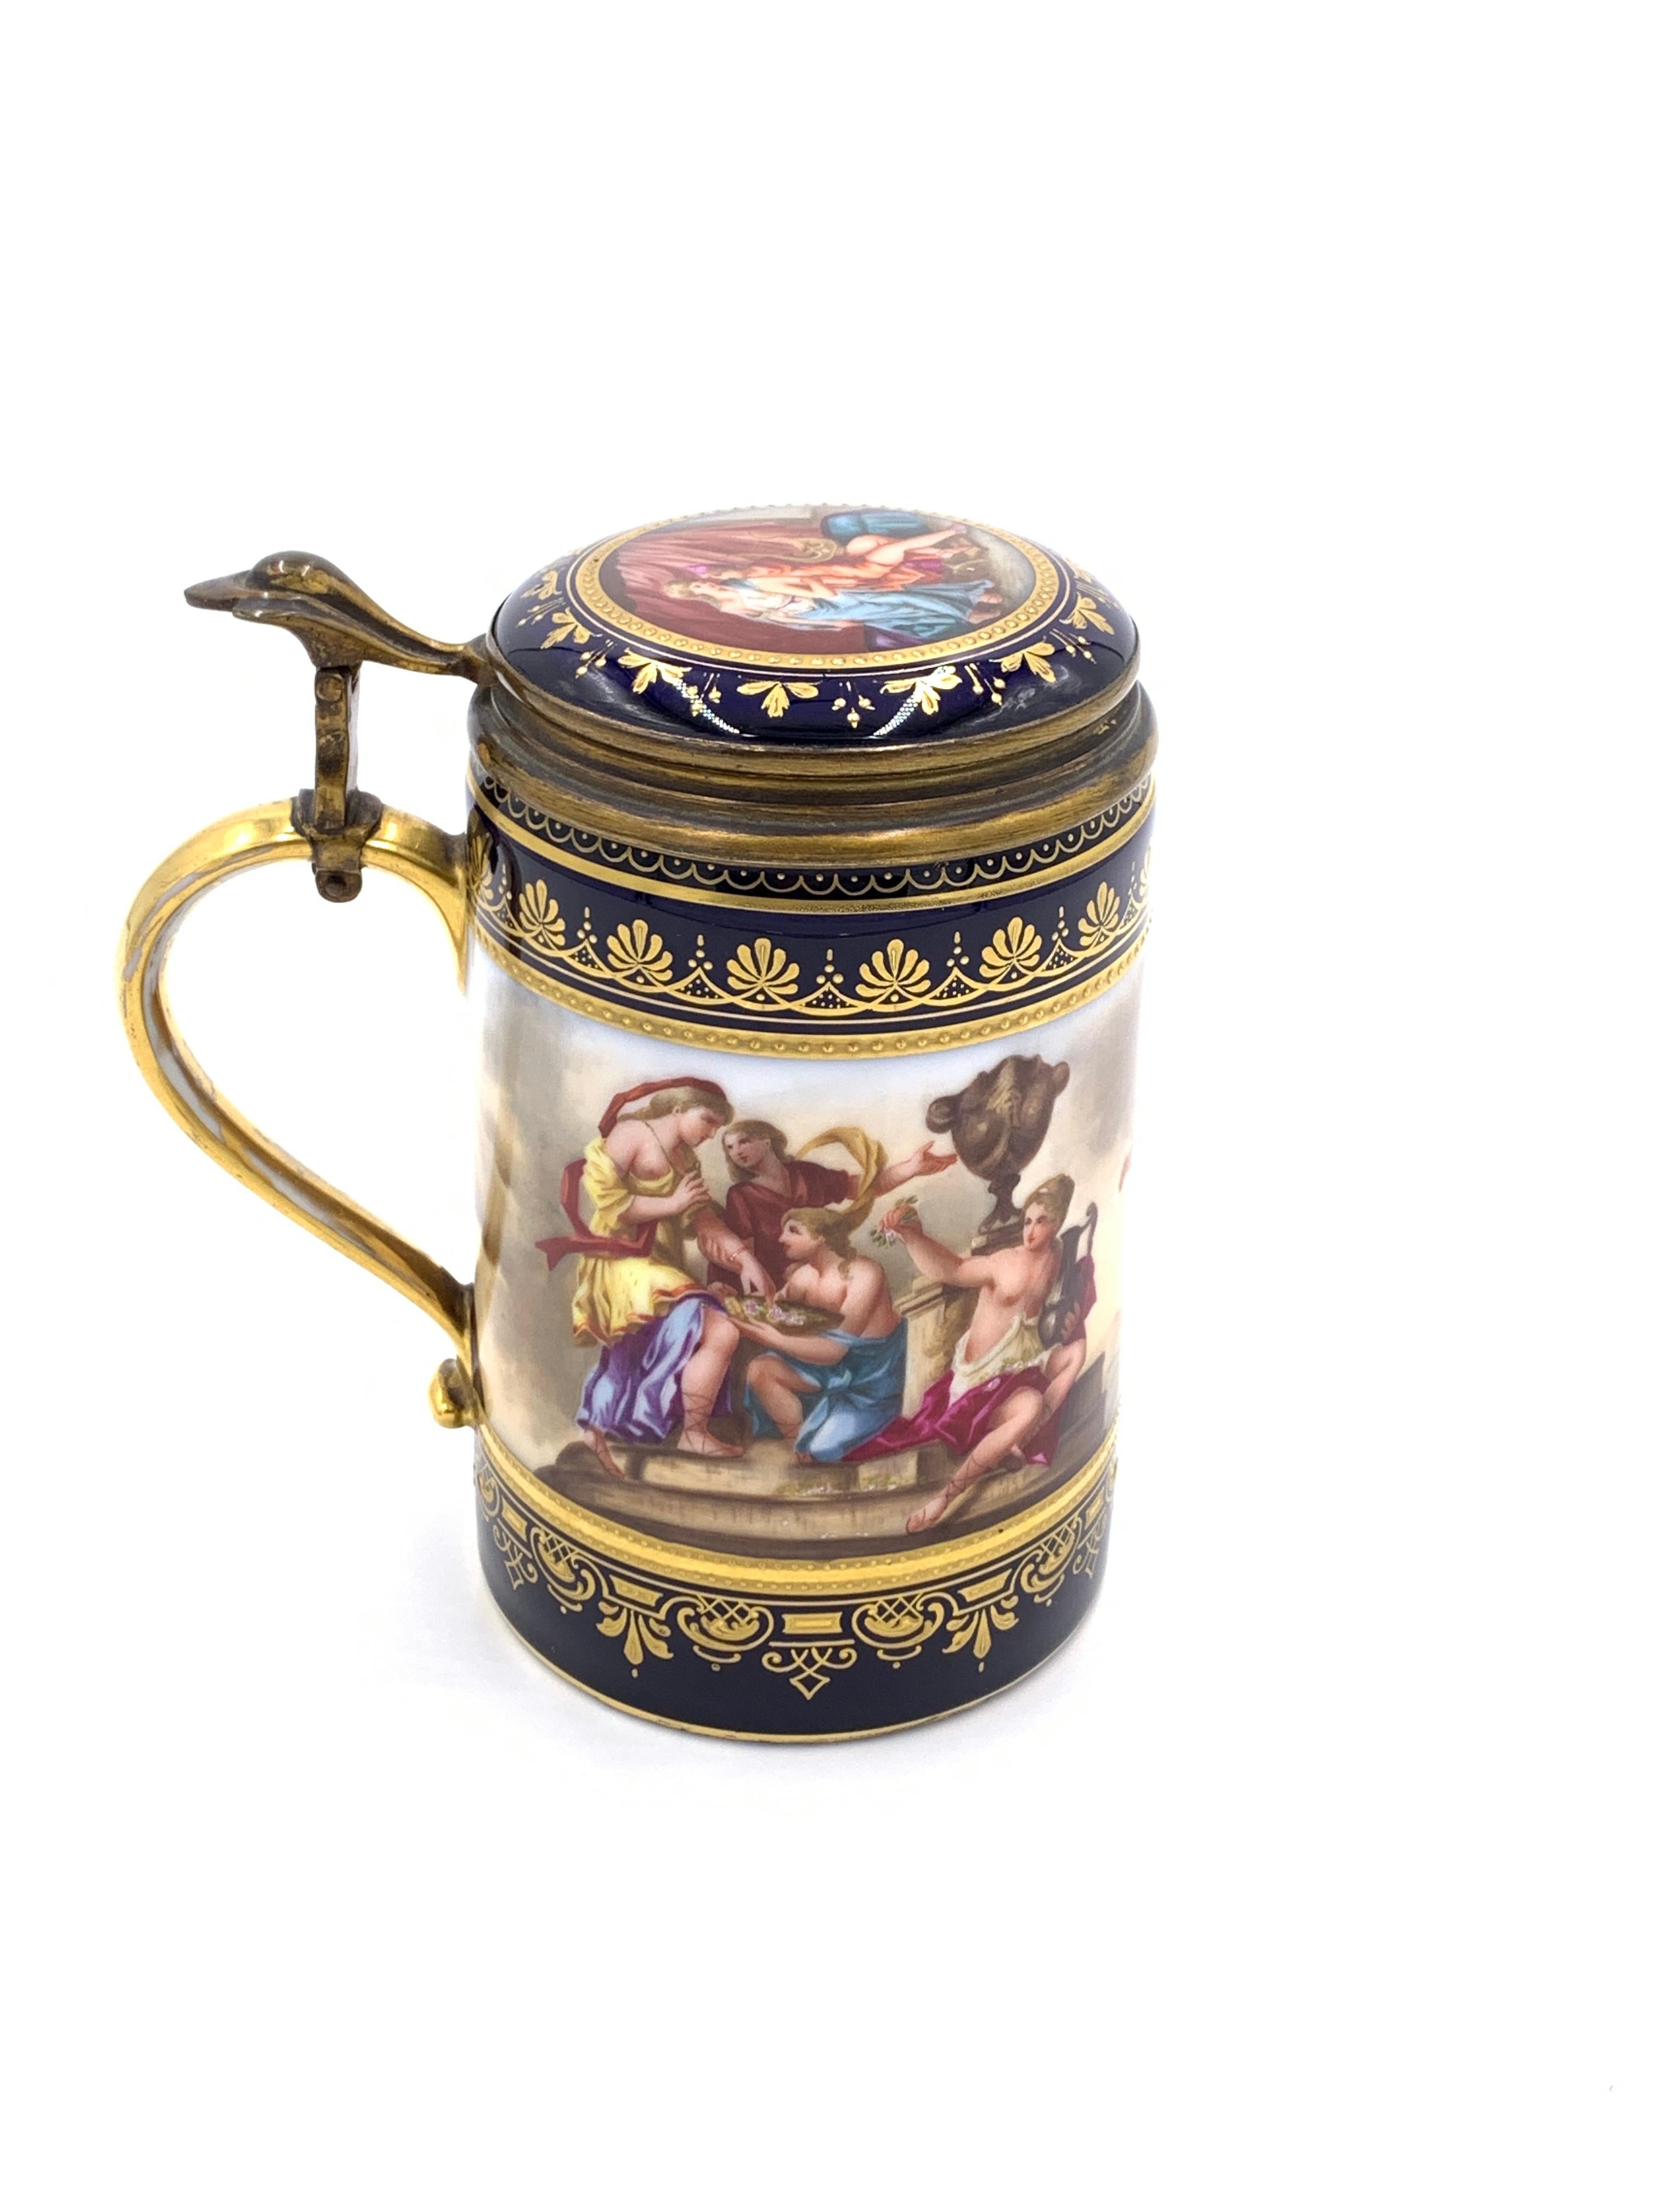 19th century Royal Vienna Porcelain lidded tankard, gilt metal above the handle and attached to the lid, decoration all around the out side and on the inner lid, blue beehive mark stamped on the base.